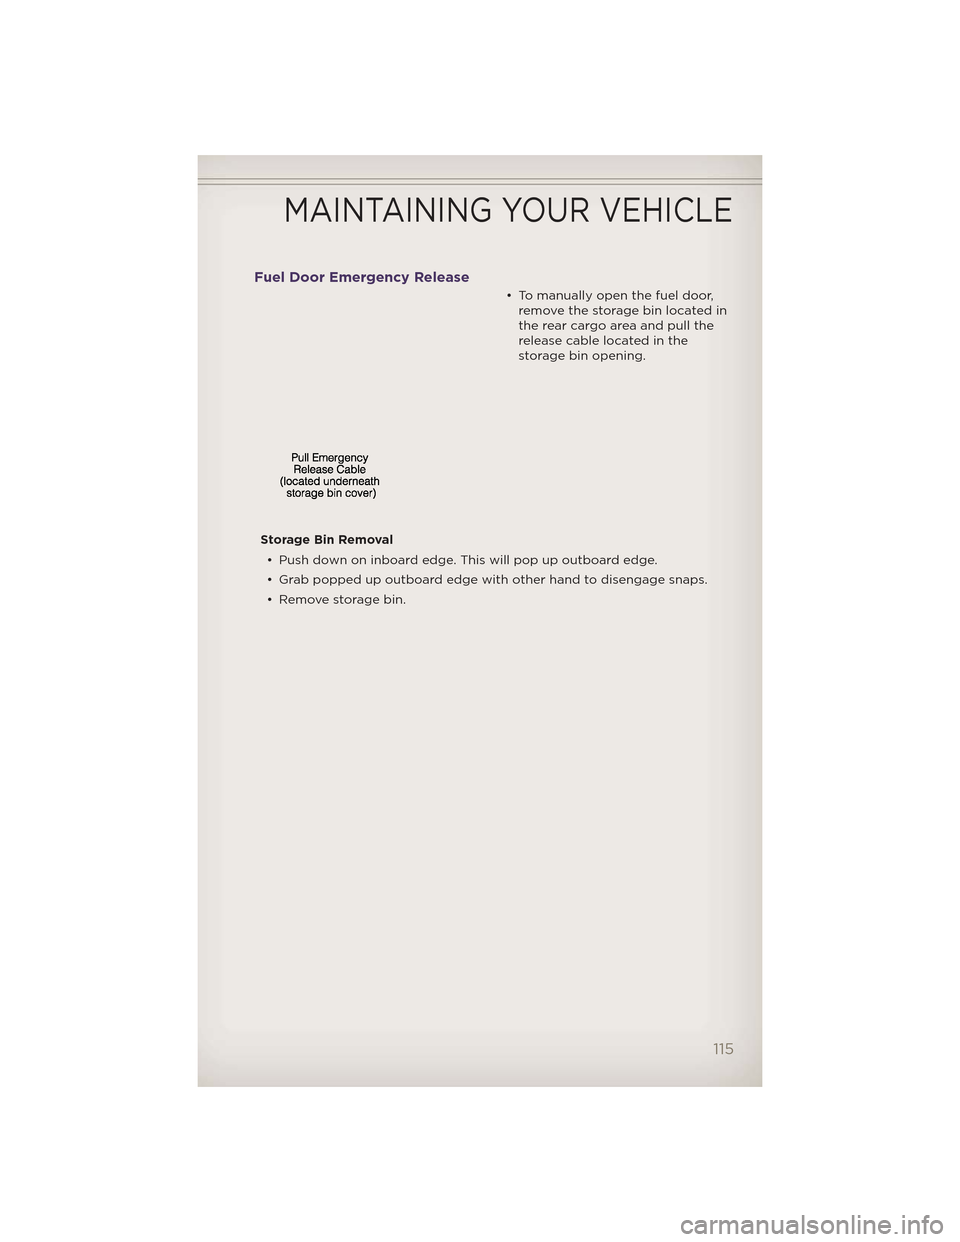 JEEP GRAND CHEROKEE 2012 WK2 / 4.G User Guide Fuel Door Emergency Release
• To manually open the fuel door,remove the storage bin located in
the rear cargo area and pull the
release cable located in the
storage bin opening.
Storage Bin Removal 